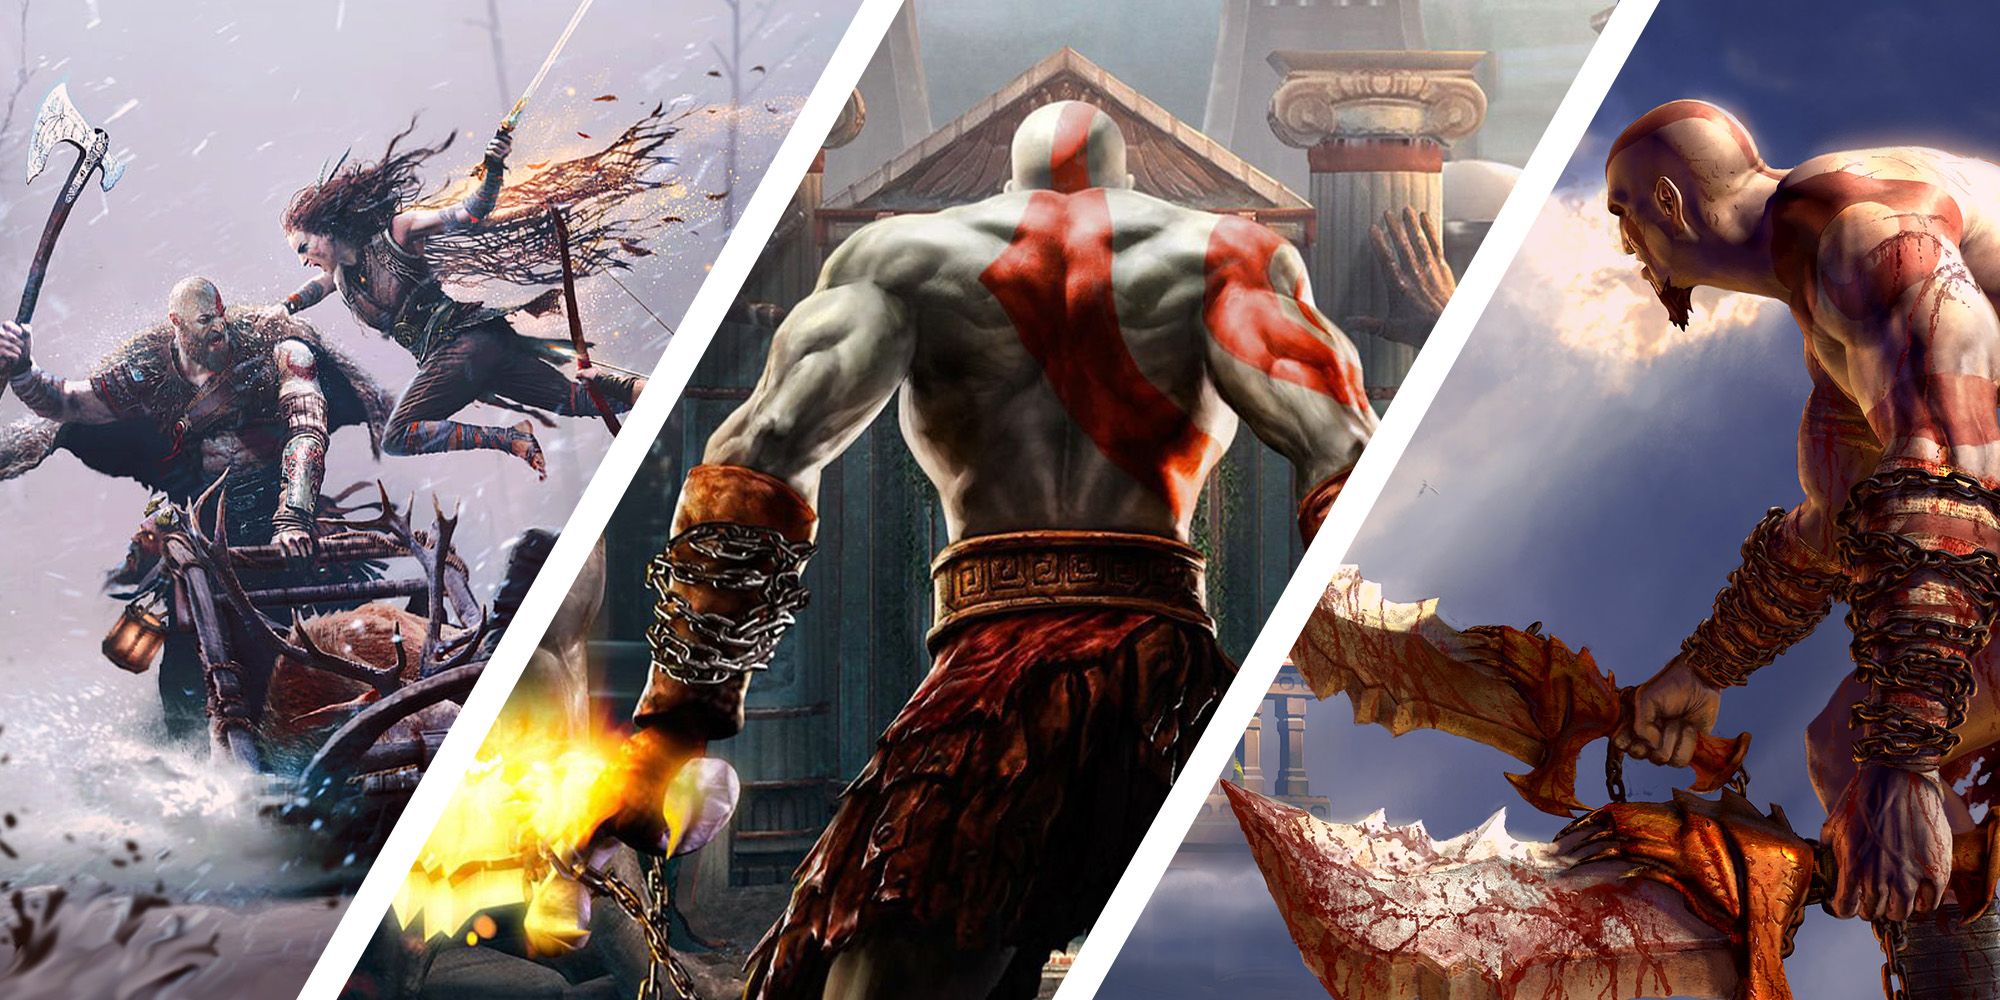 Kratos from God of War 2 facing temple surrounded by Kratos from Ragnarok and God of War